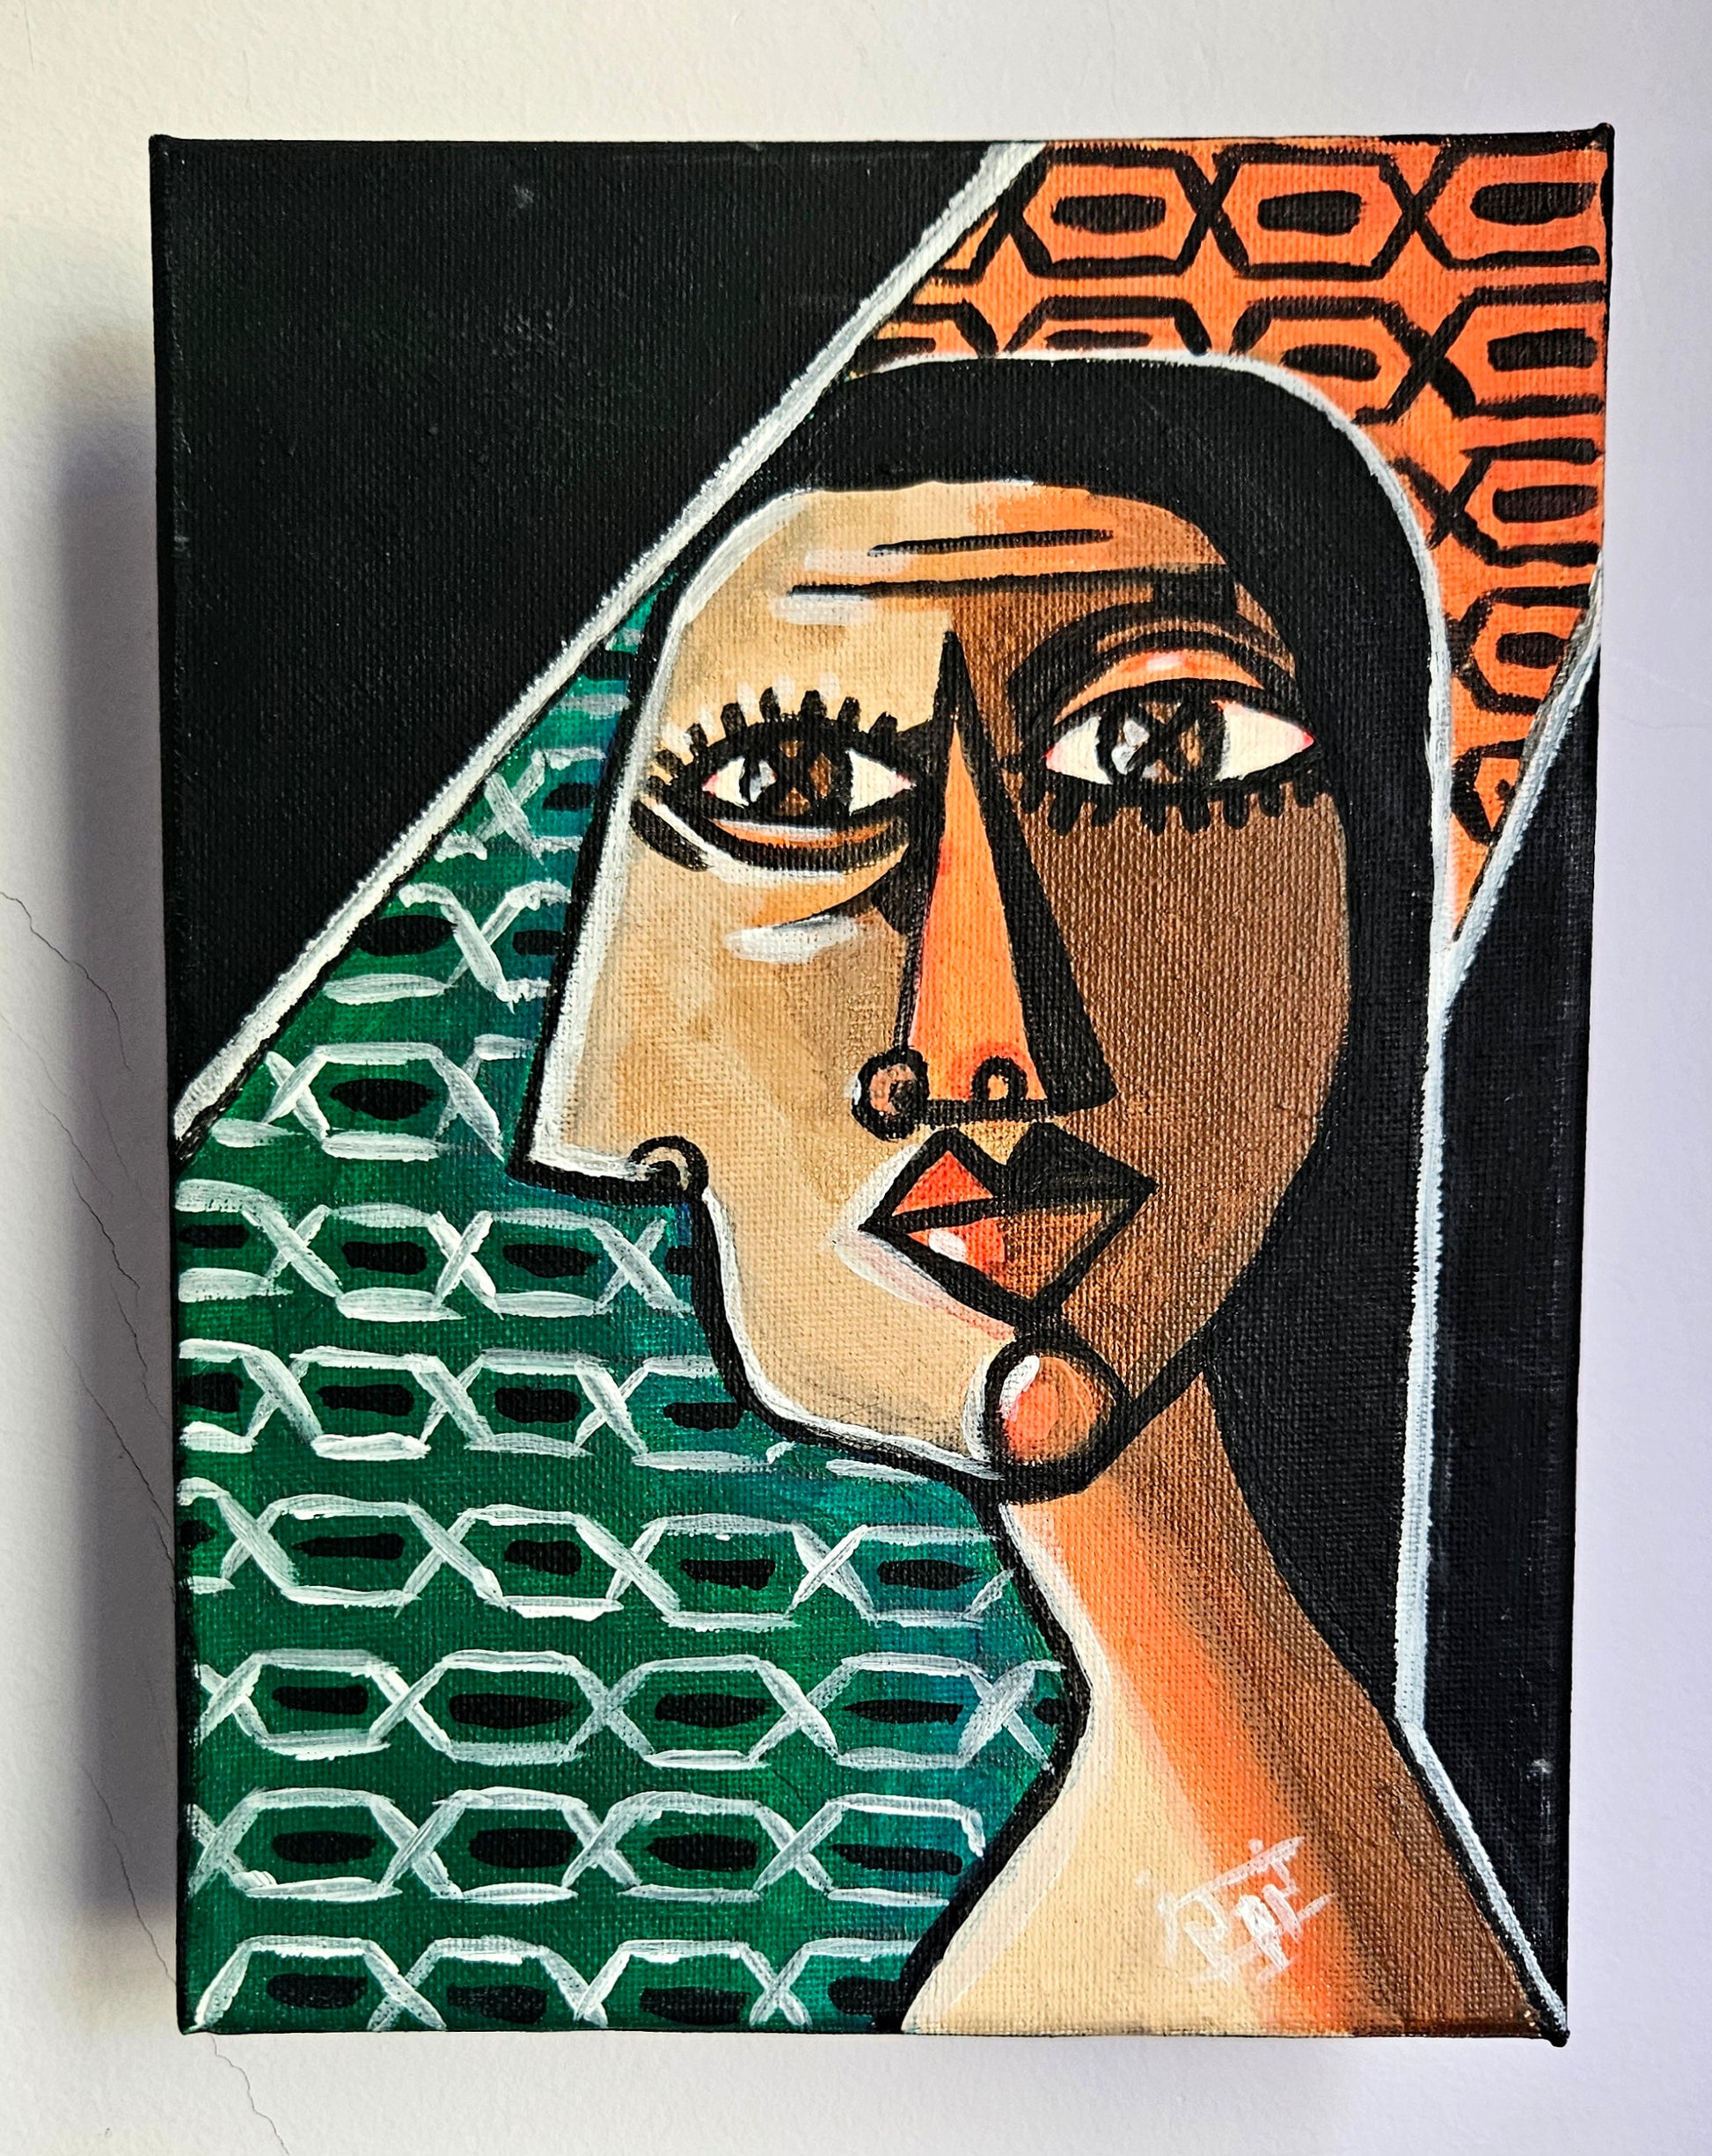 Acrylic painting titled "Merge of Reflections" depicting a woman with one detailed, forward-facing face and a partially obscured profile, both conveying serenity and introspection